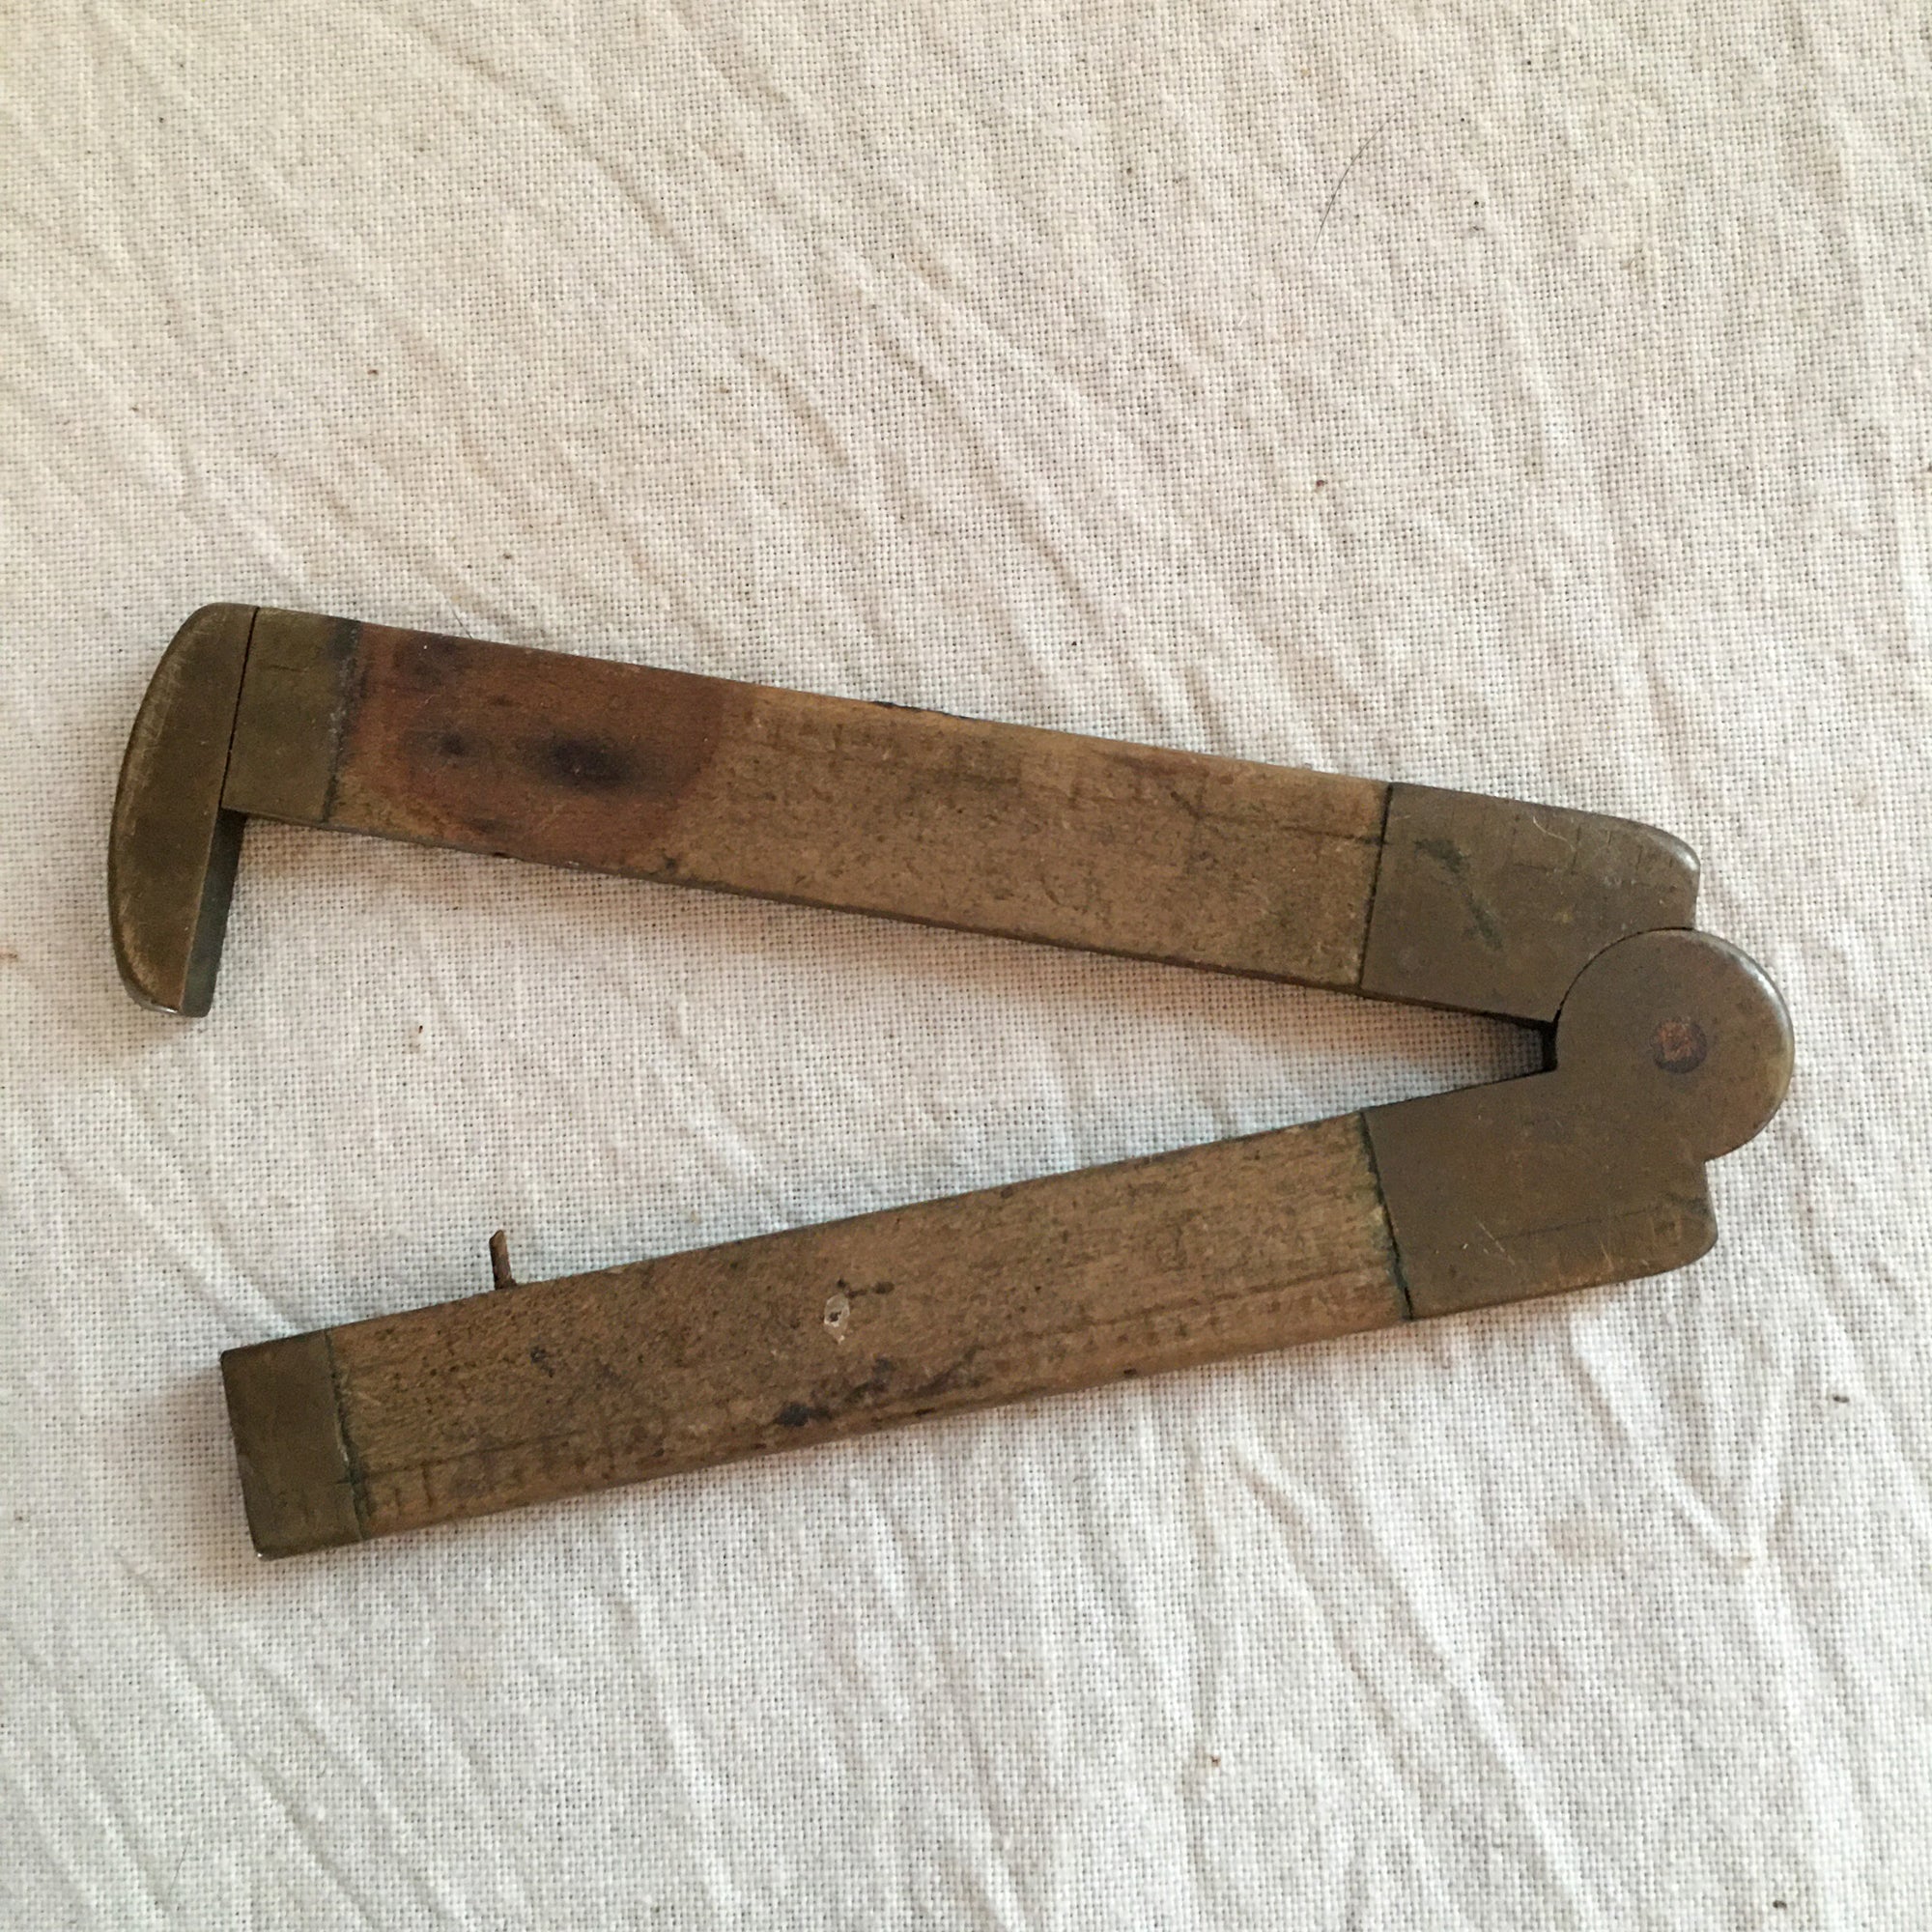 Early 1900’s Set of 3 Wooden and Brass Rules, Primitive Screwdriver